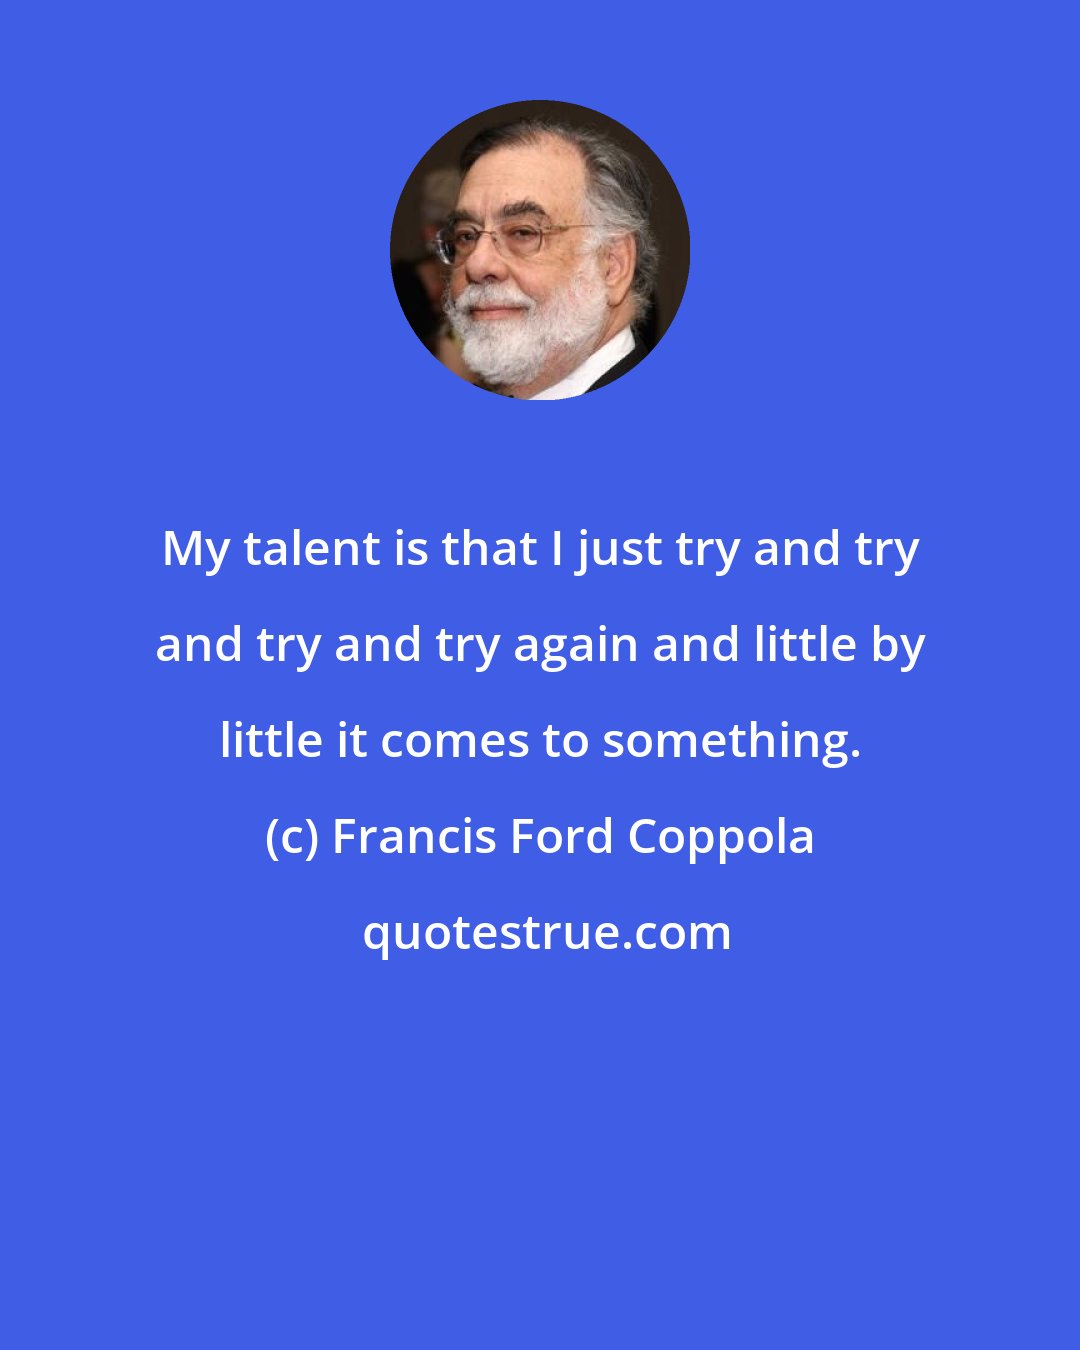 Francis Ford Coppola: My talent is that I just try and try and try and try again and little by little it comes to something.